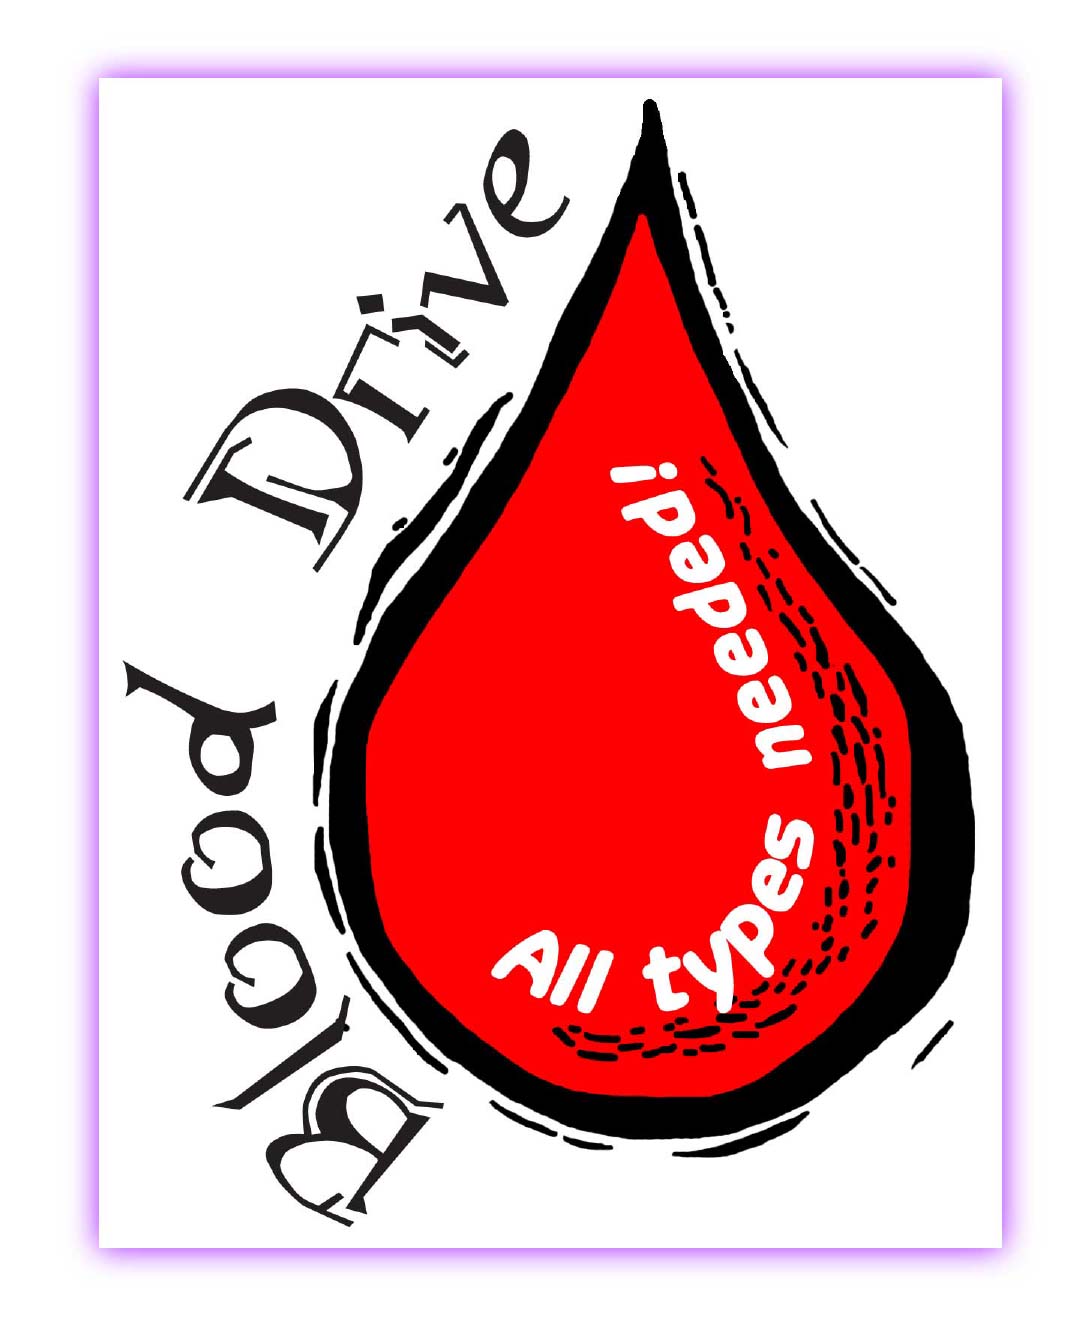 36 Blood Drive Images   Free Cliparts That You Can Download To You